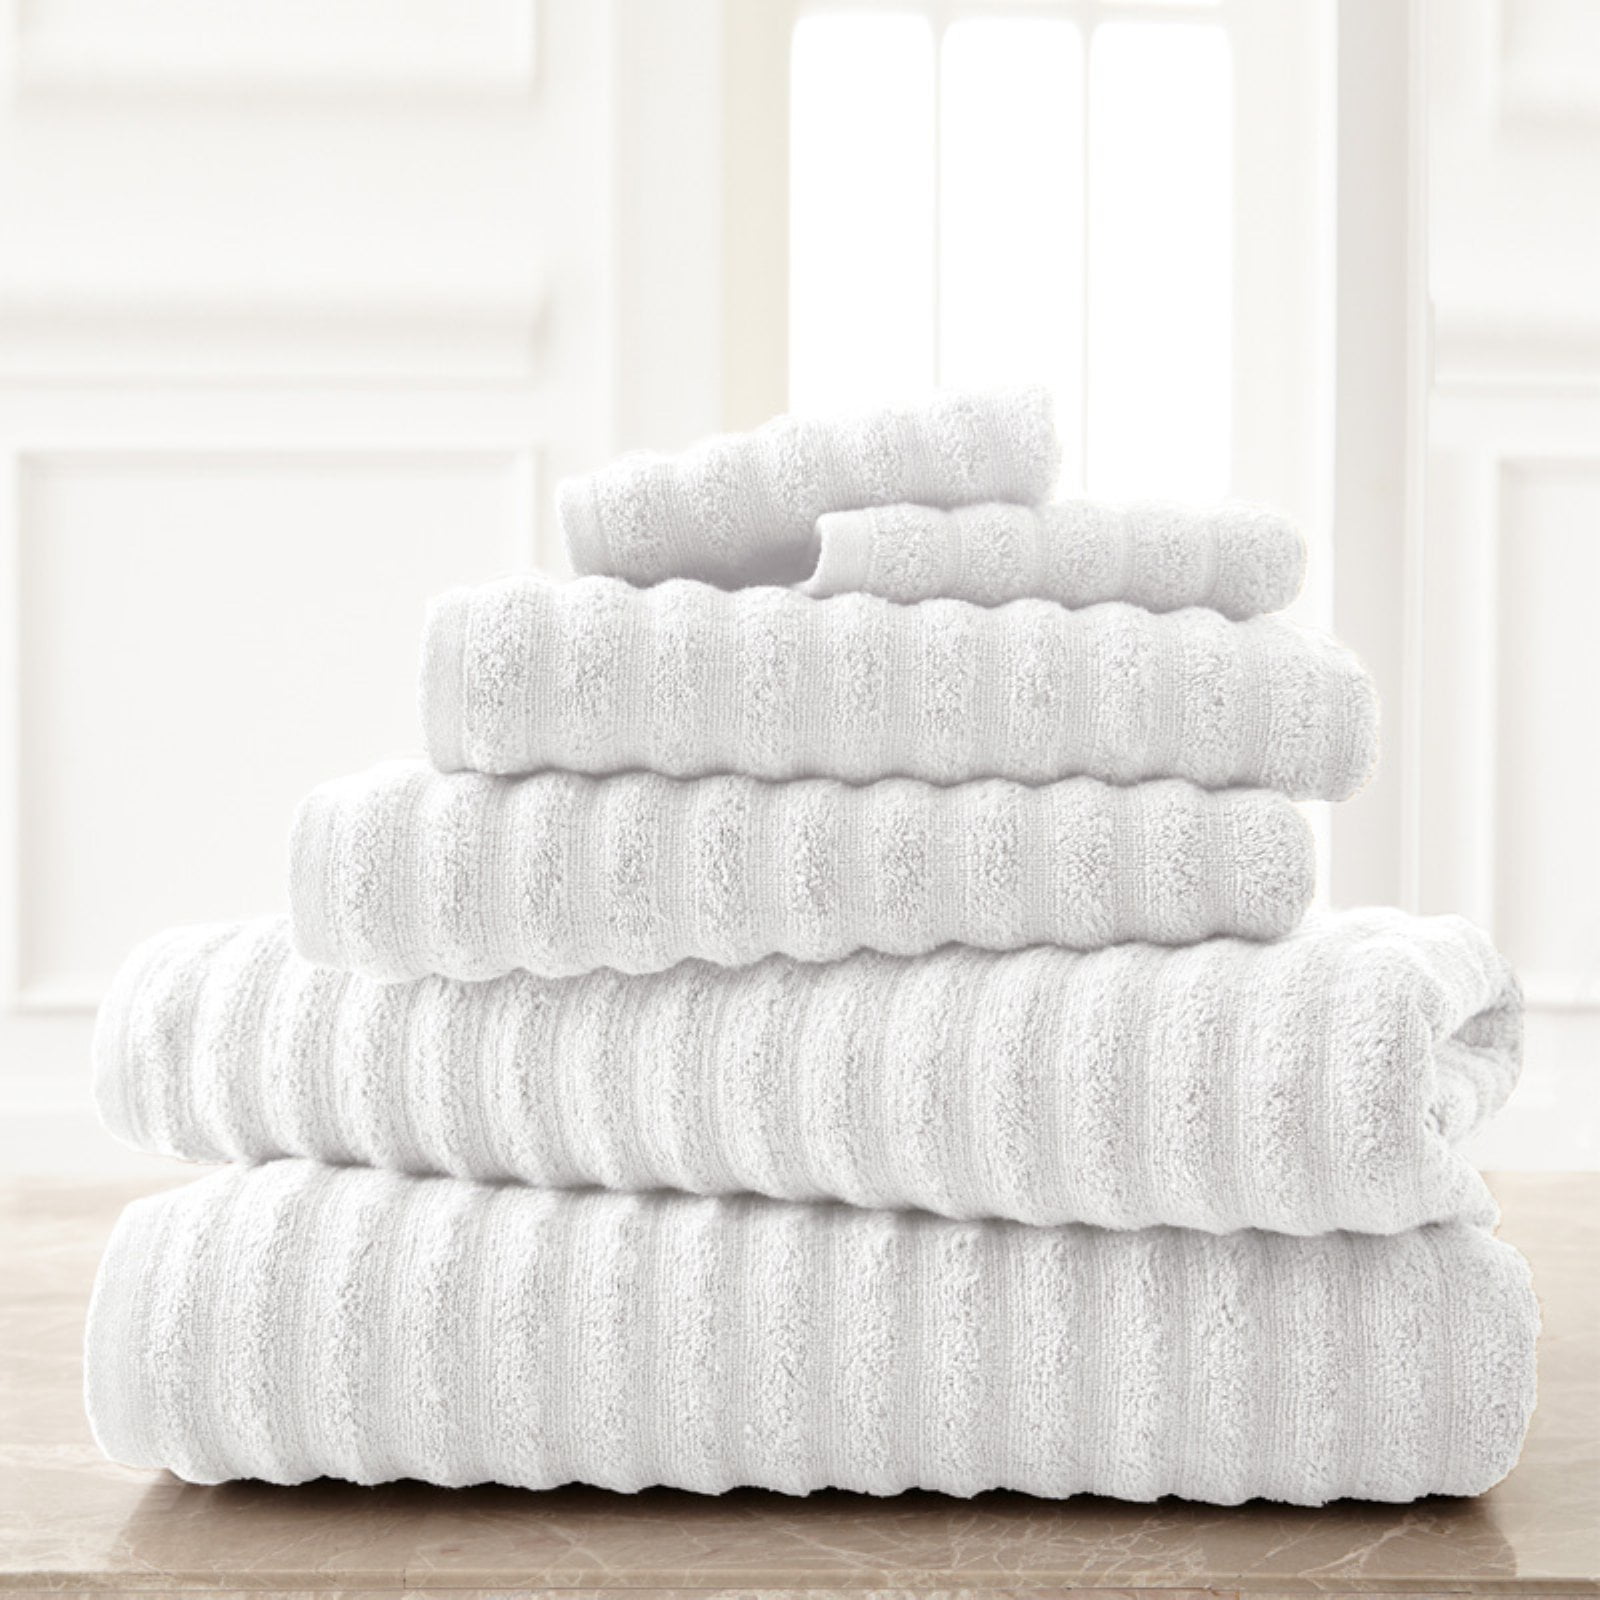 Details about   Hencely Home 100% Cotton Bath Towel Collection 